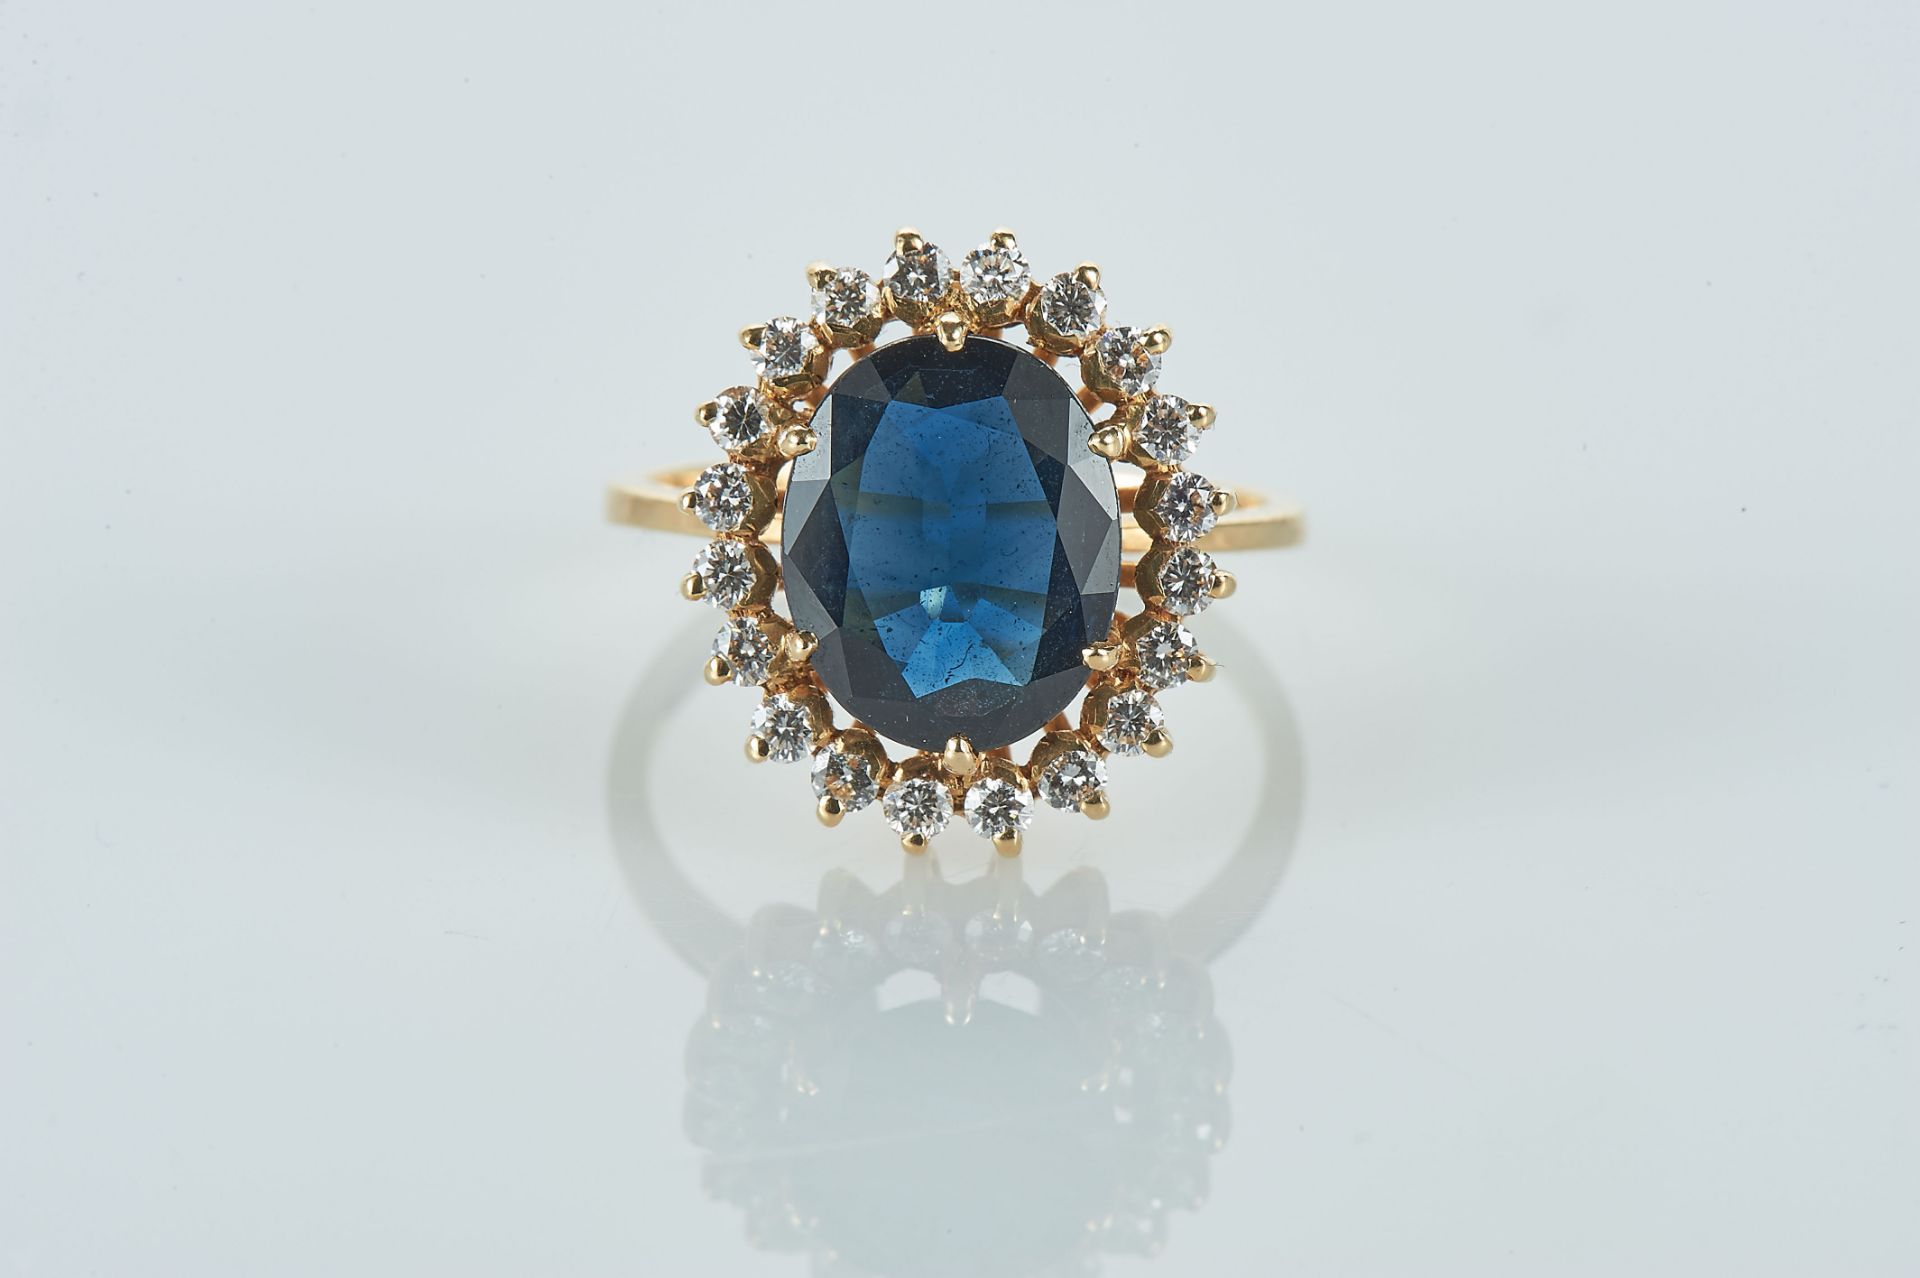 A Ring, 800/1000 gold, set with an oval cut Australian sapphire with the approximate weight of 3 ct.